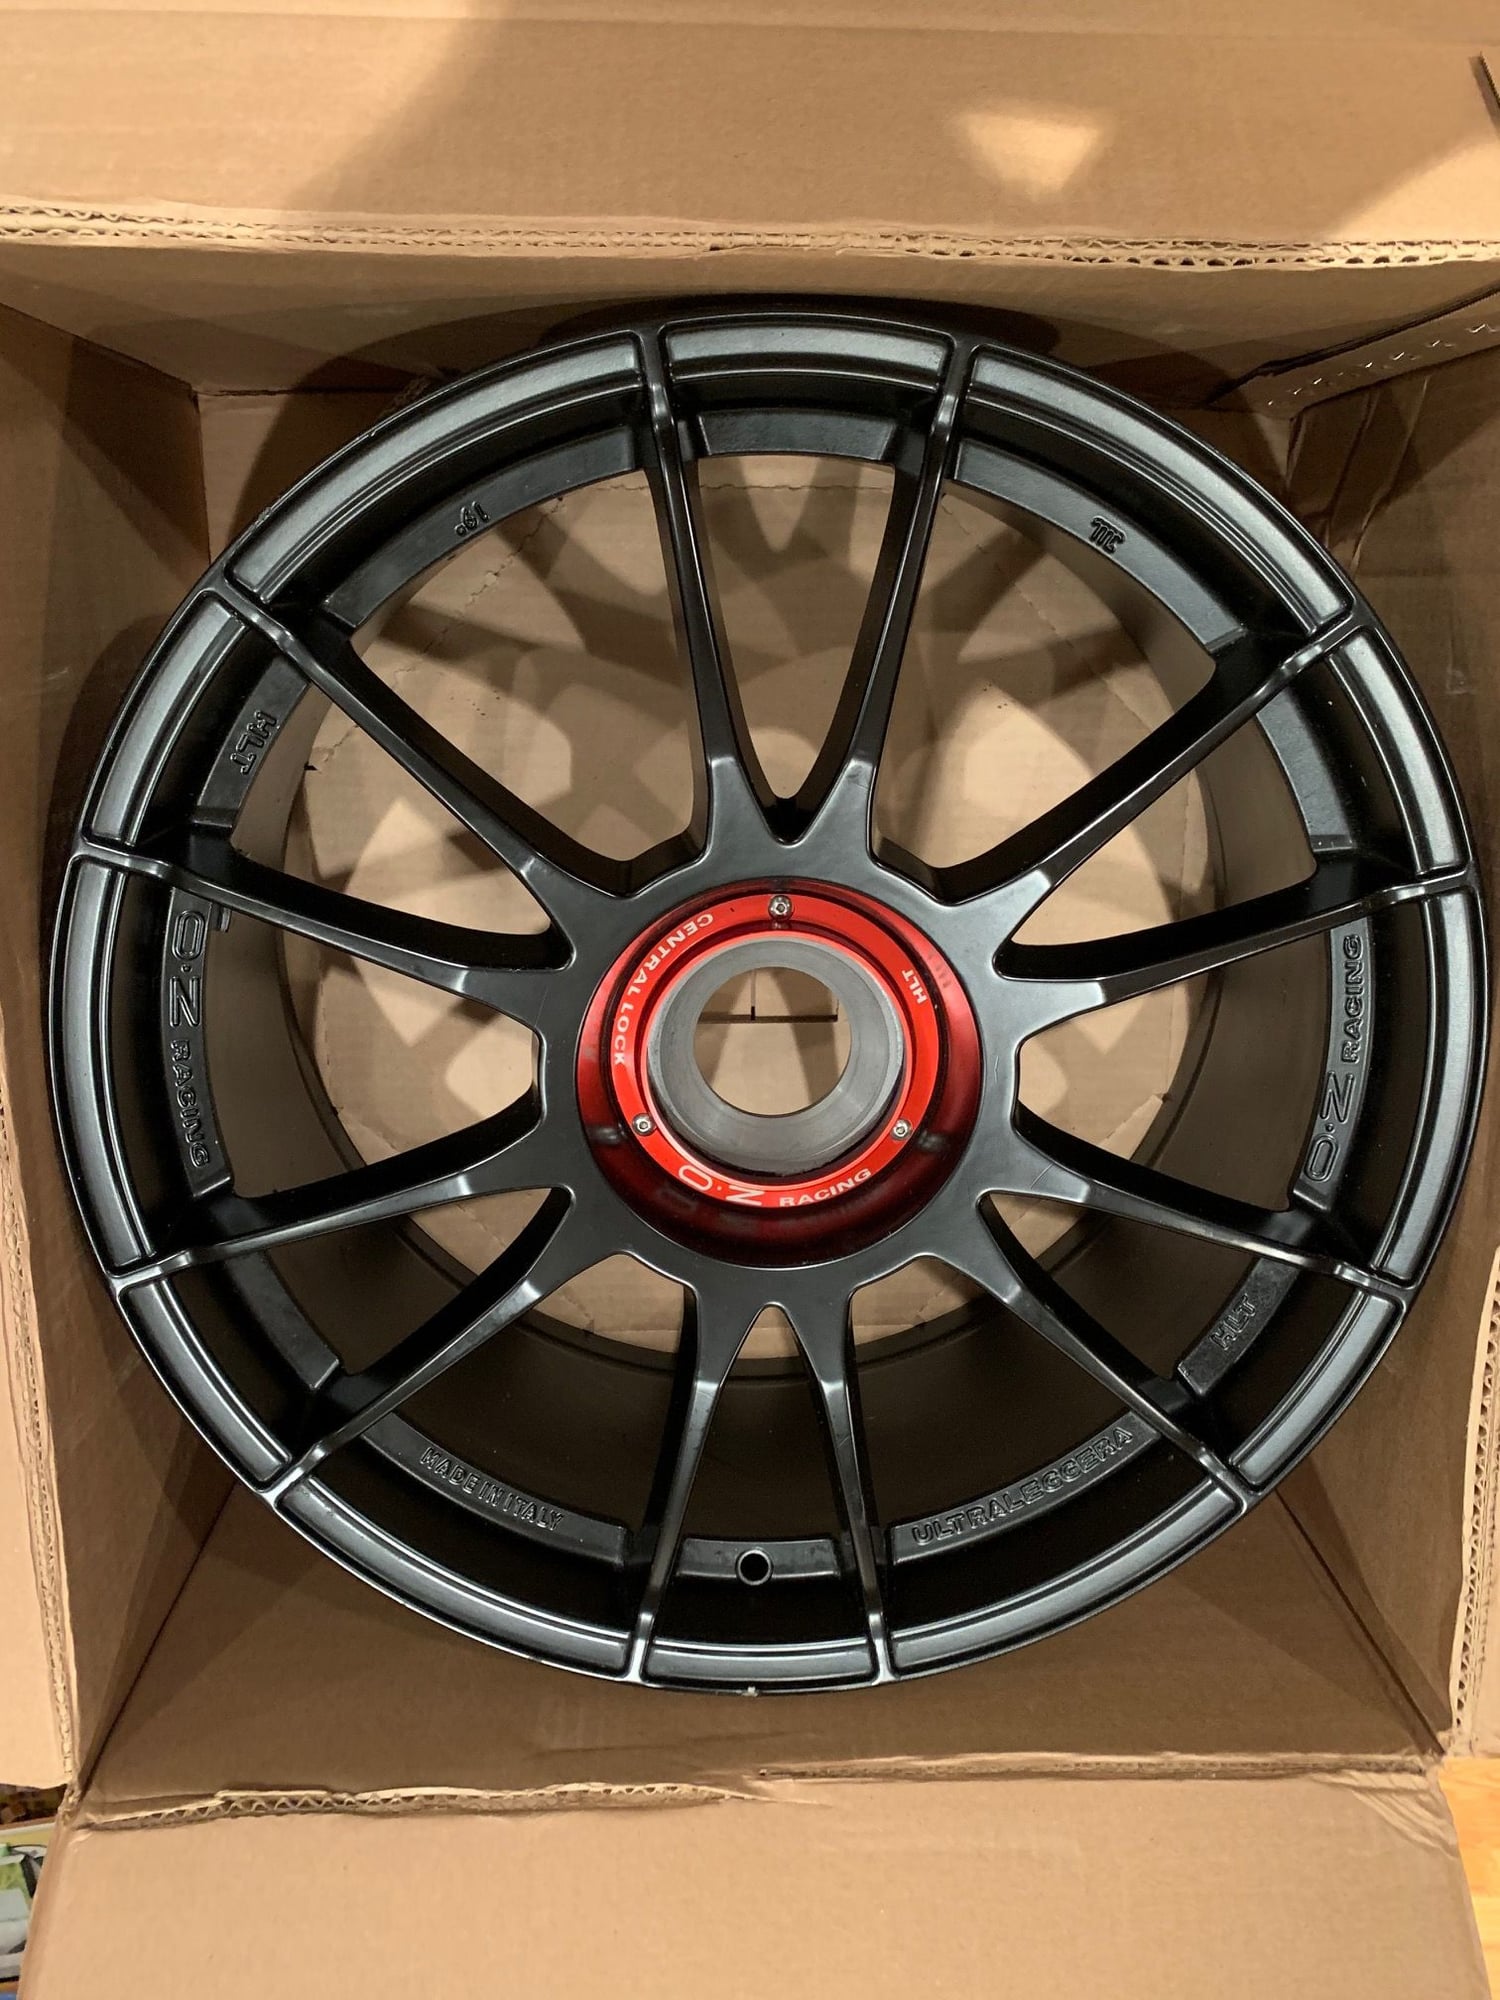 Wheels and Tires/Axles - OZ Centerlock Wheels for 997 GT3 19" - Used - 2010 to 2012 Porsche GT3 - Campbell, CA 95008, United States